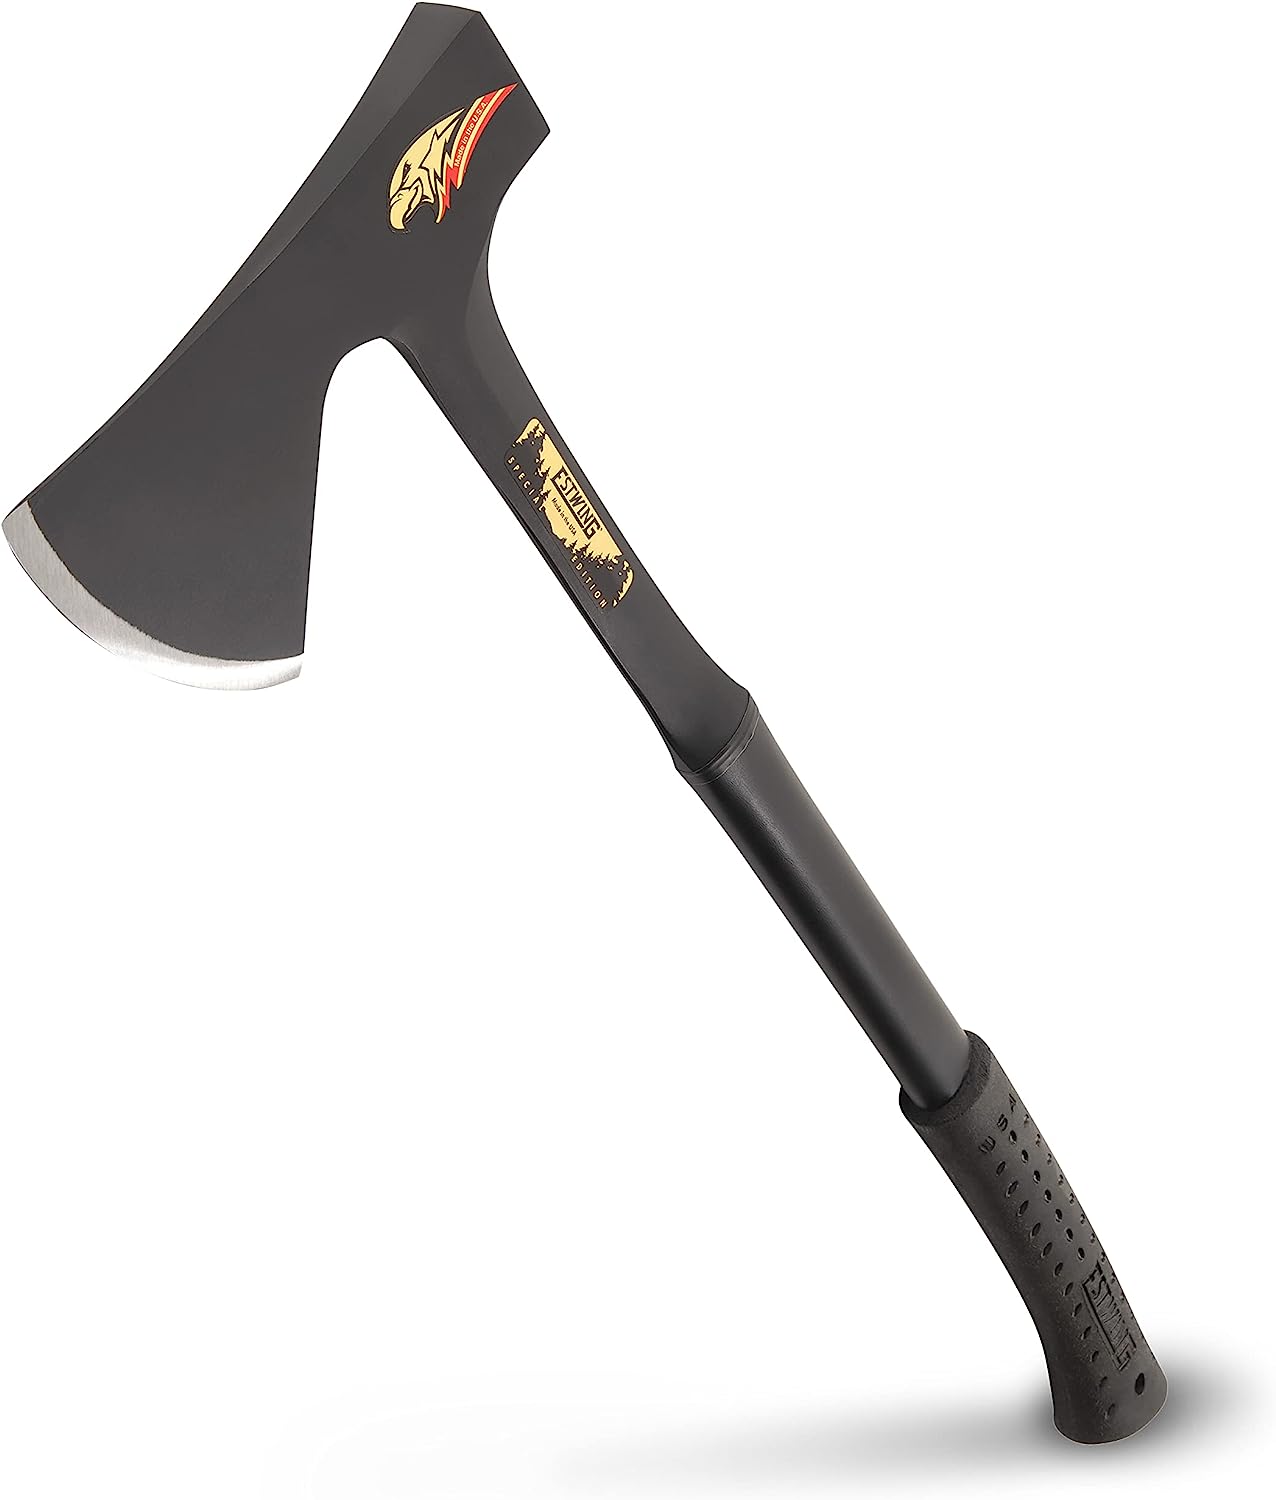 ESTWING Special Edition Camper's Axe - 26